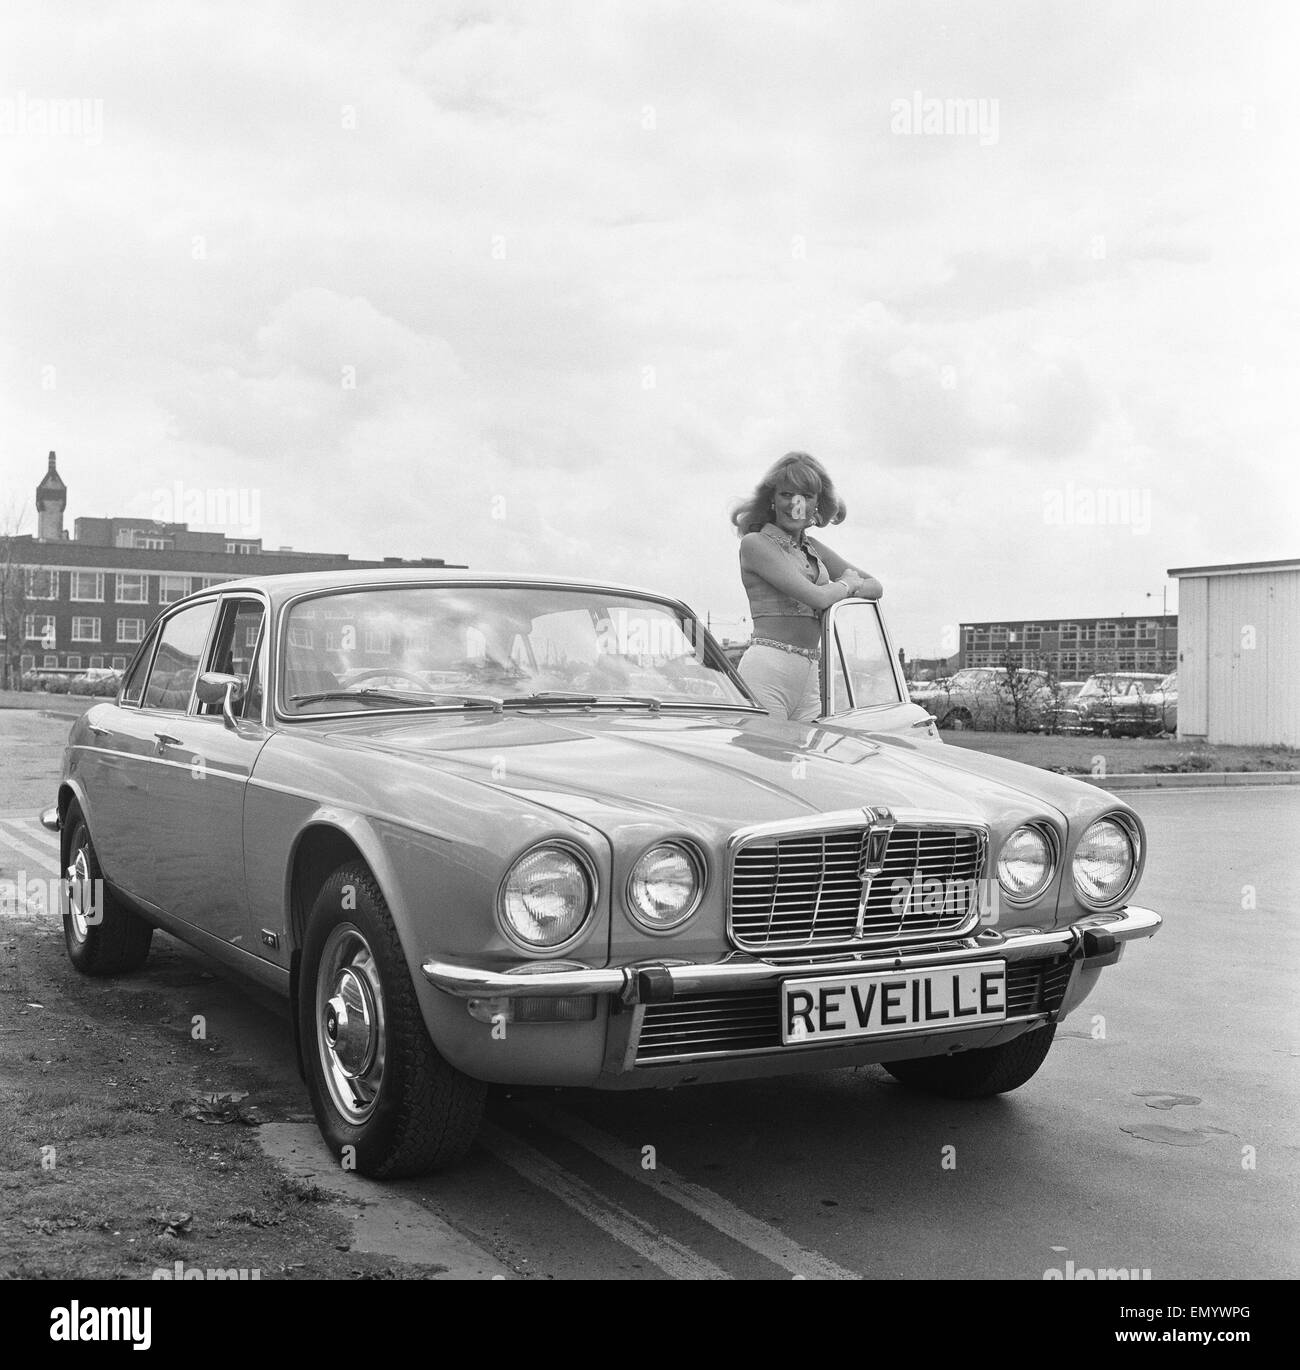 Reveille model seen here posing with a Jaguar XJ12, which is first prize in a Reveille car competition. Circa January 1972 Stock Photo